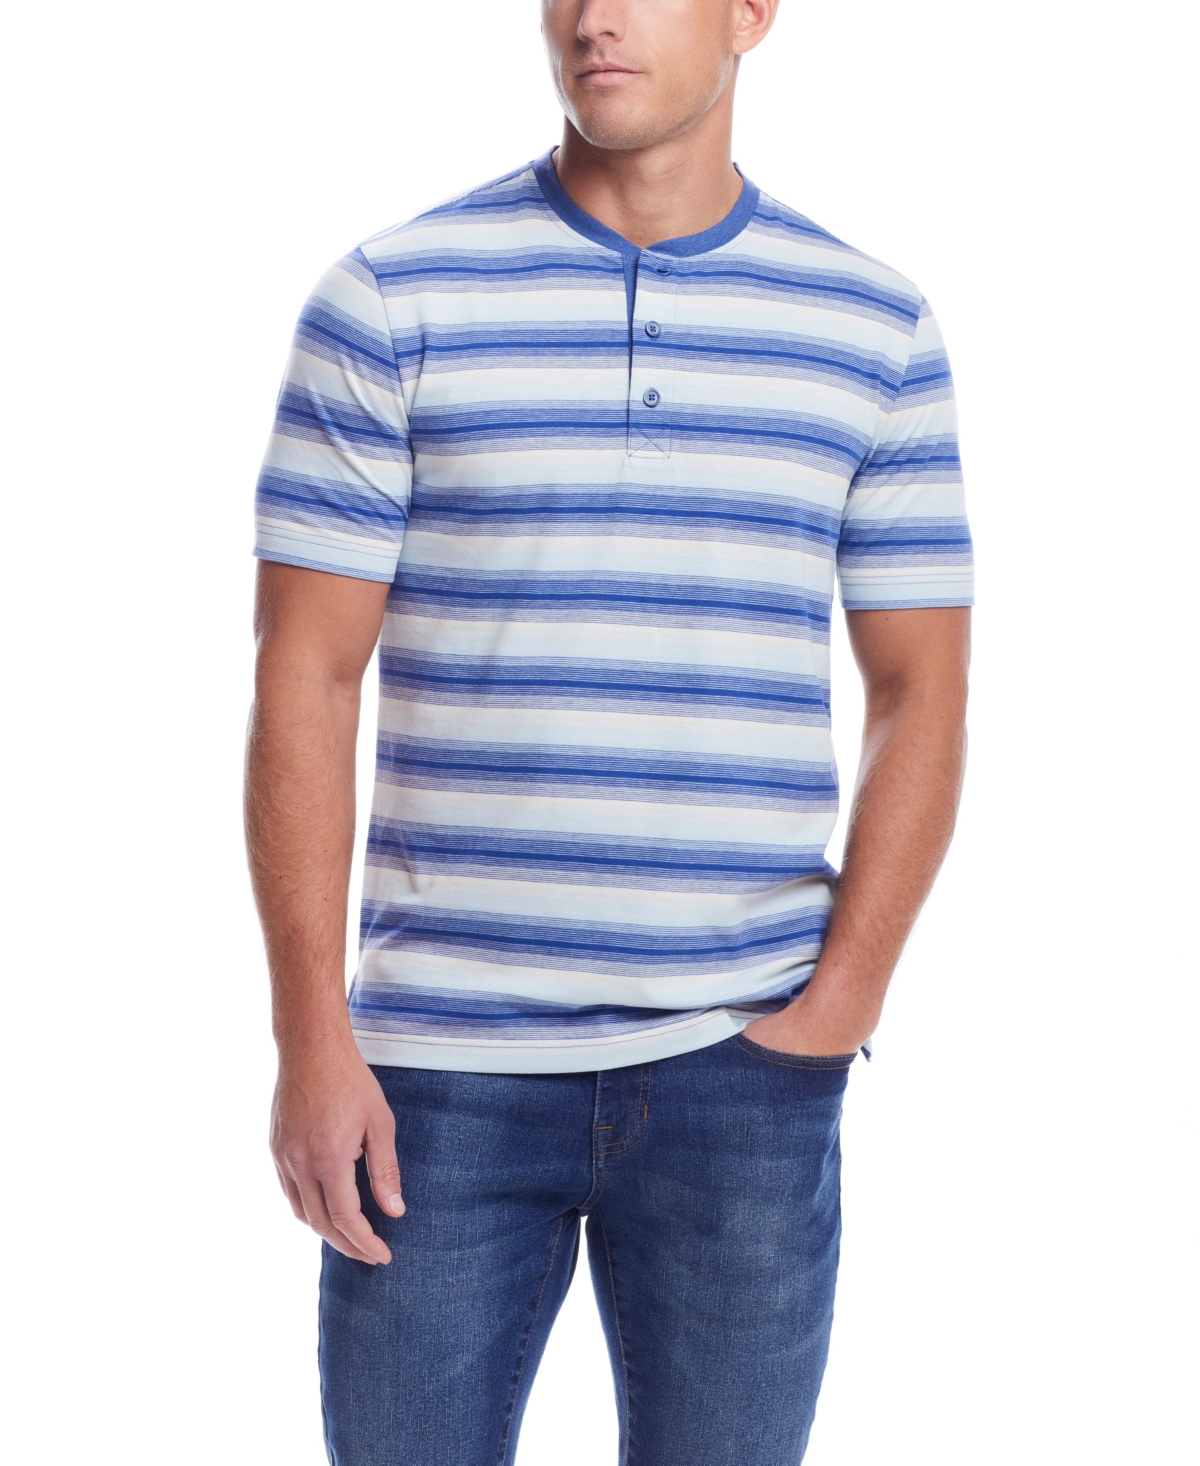 Men's Short Sleeve Striped Sueded Jersey - CRYSTAL BLUE